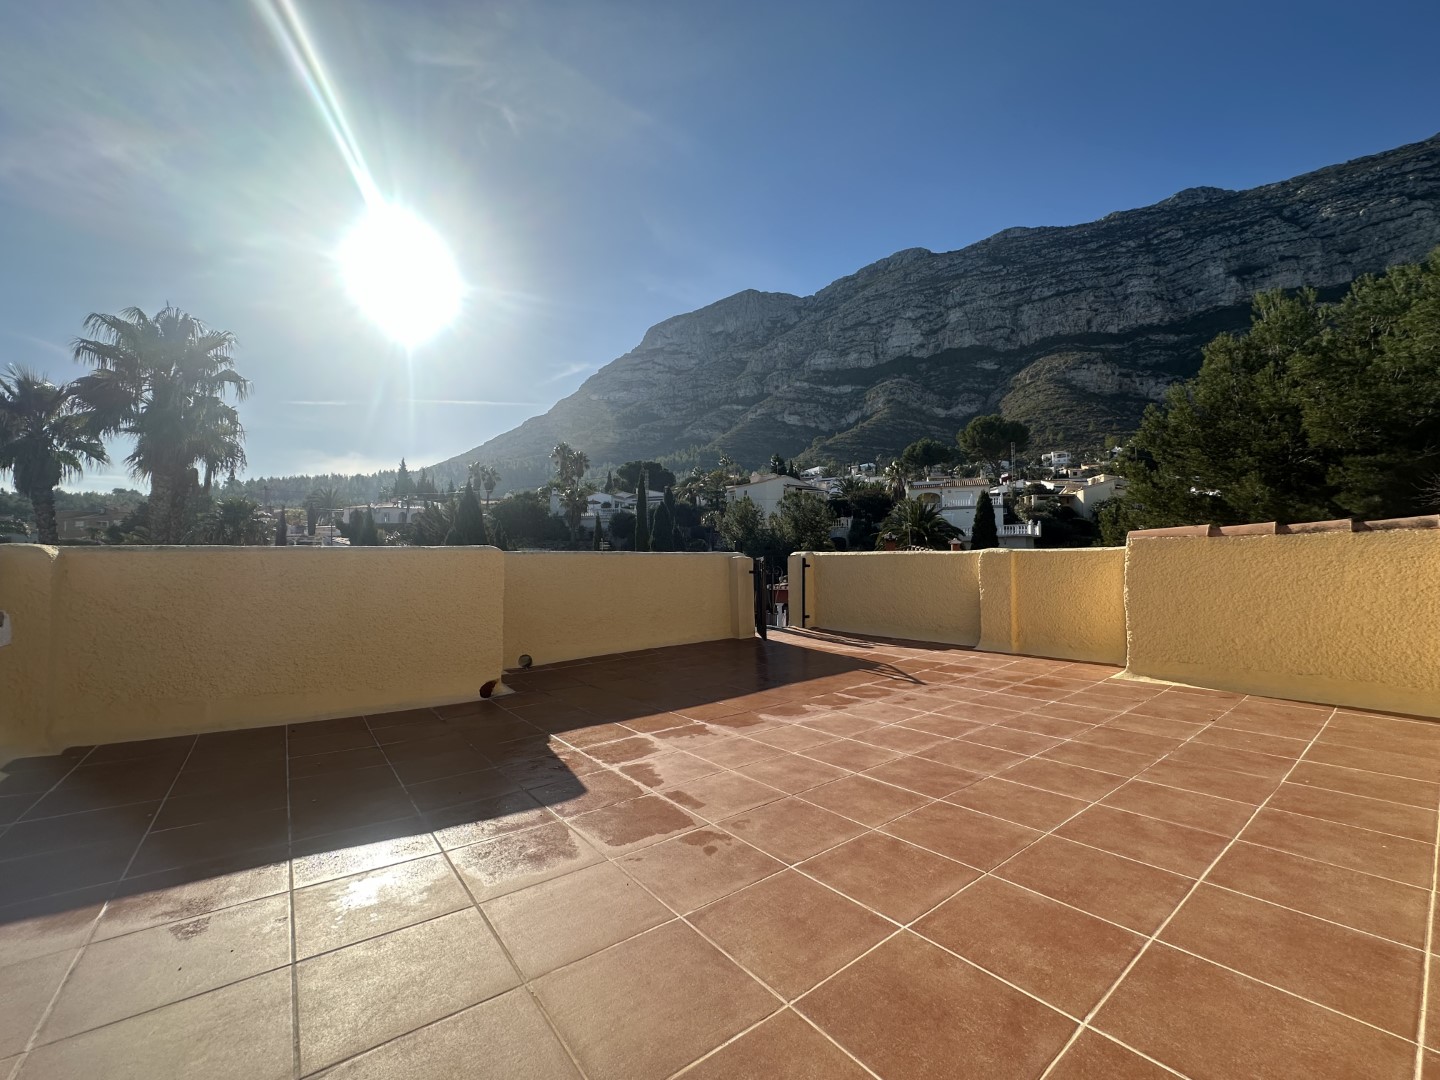 3-Bedroom Villa for sale with views of the Montgó mountain.